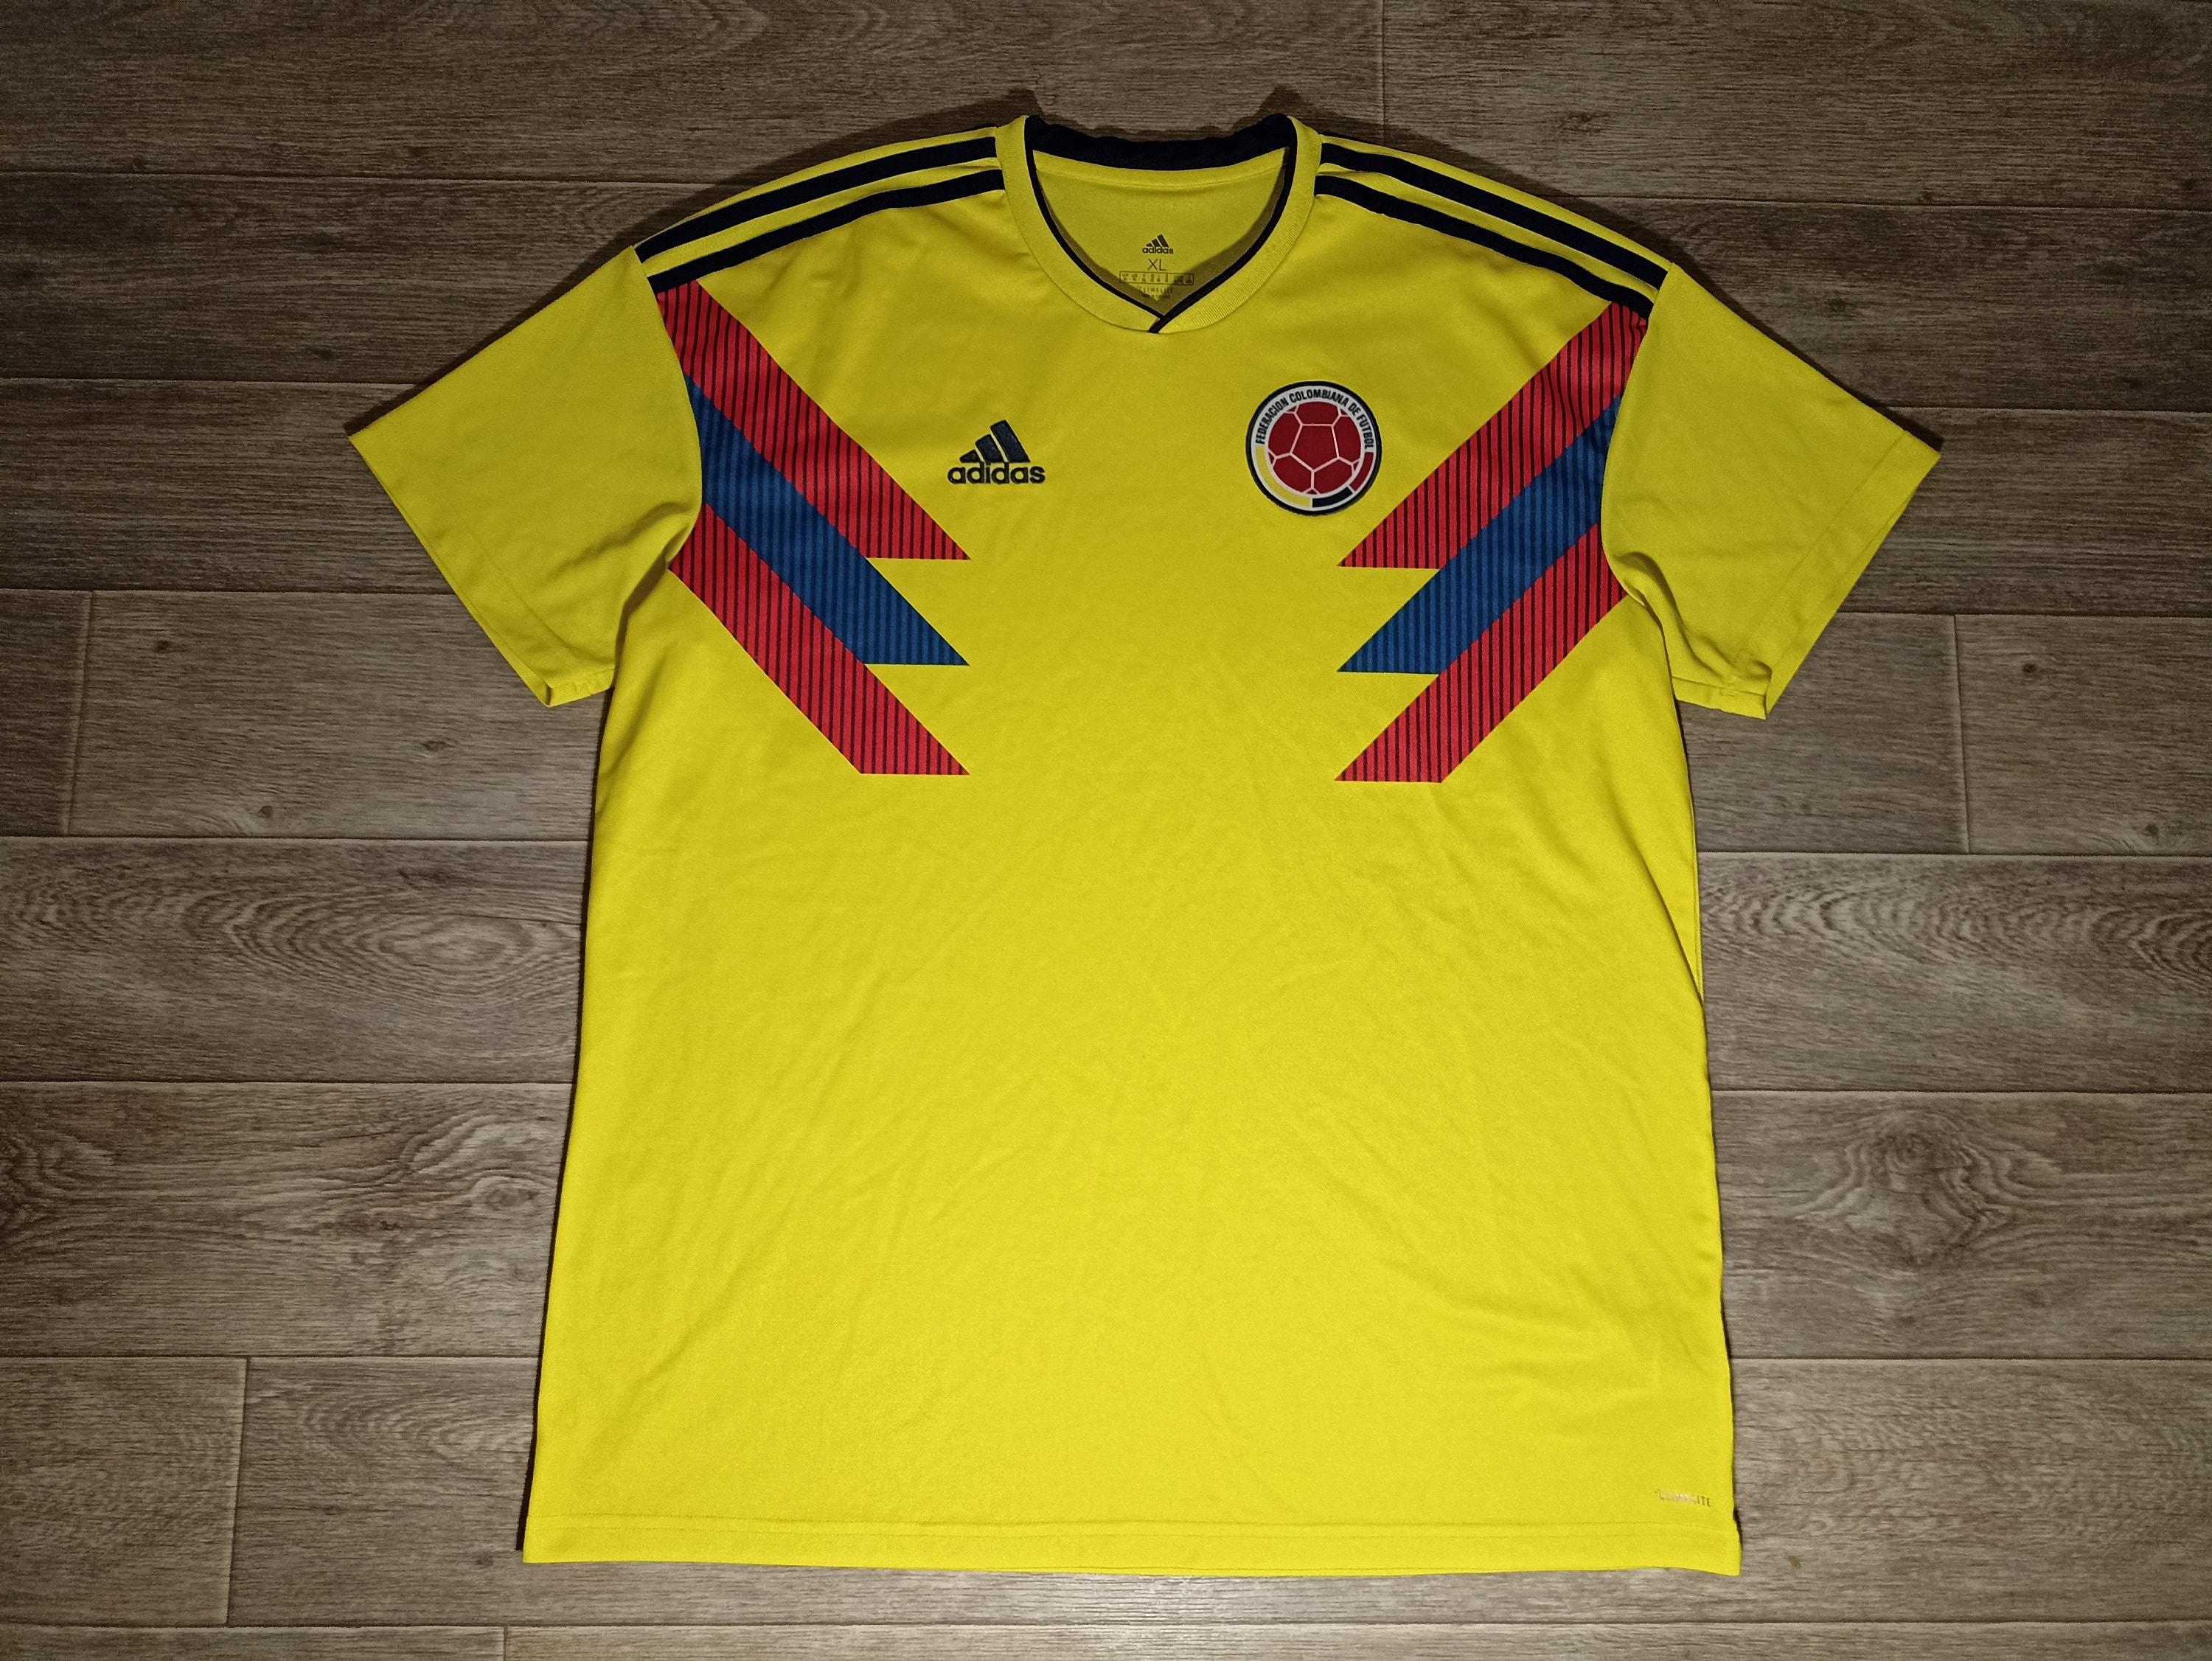 Adidas Originals Colombia Red 1990 World Cup Jersey Limited Edition! Medium  New